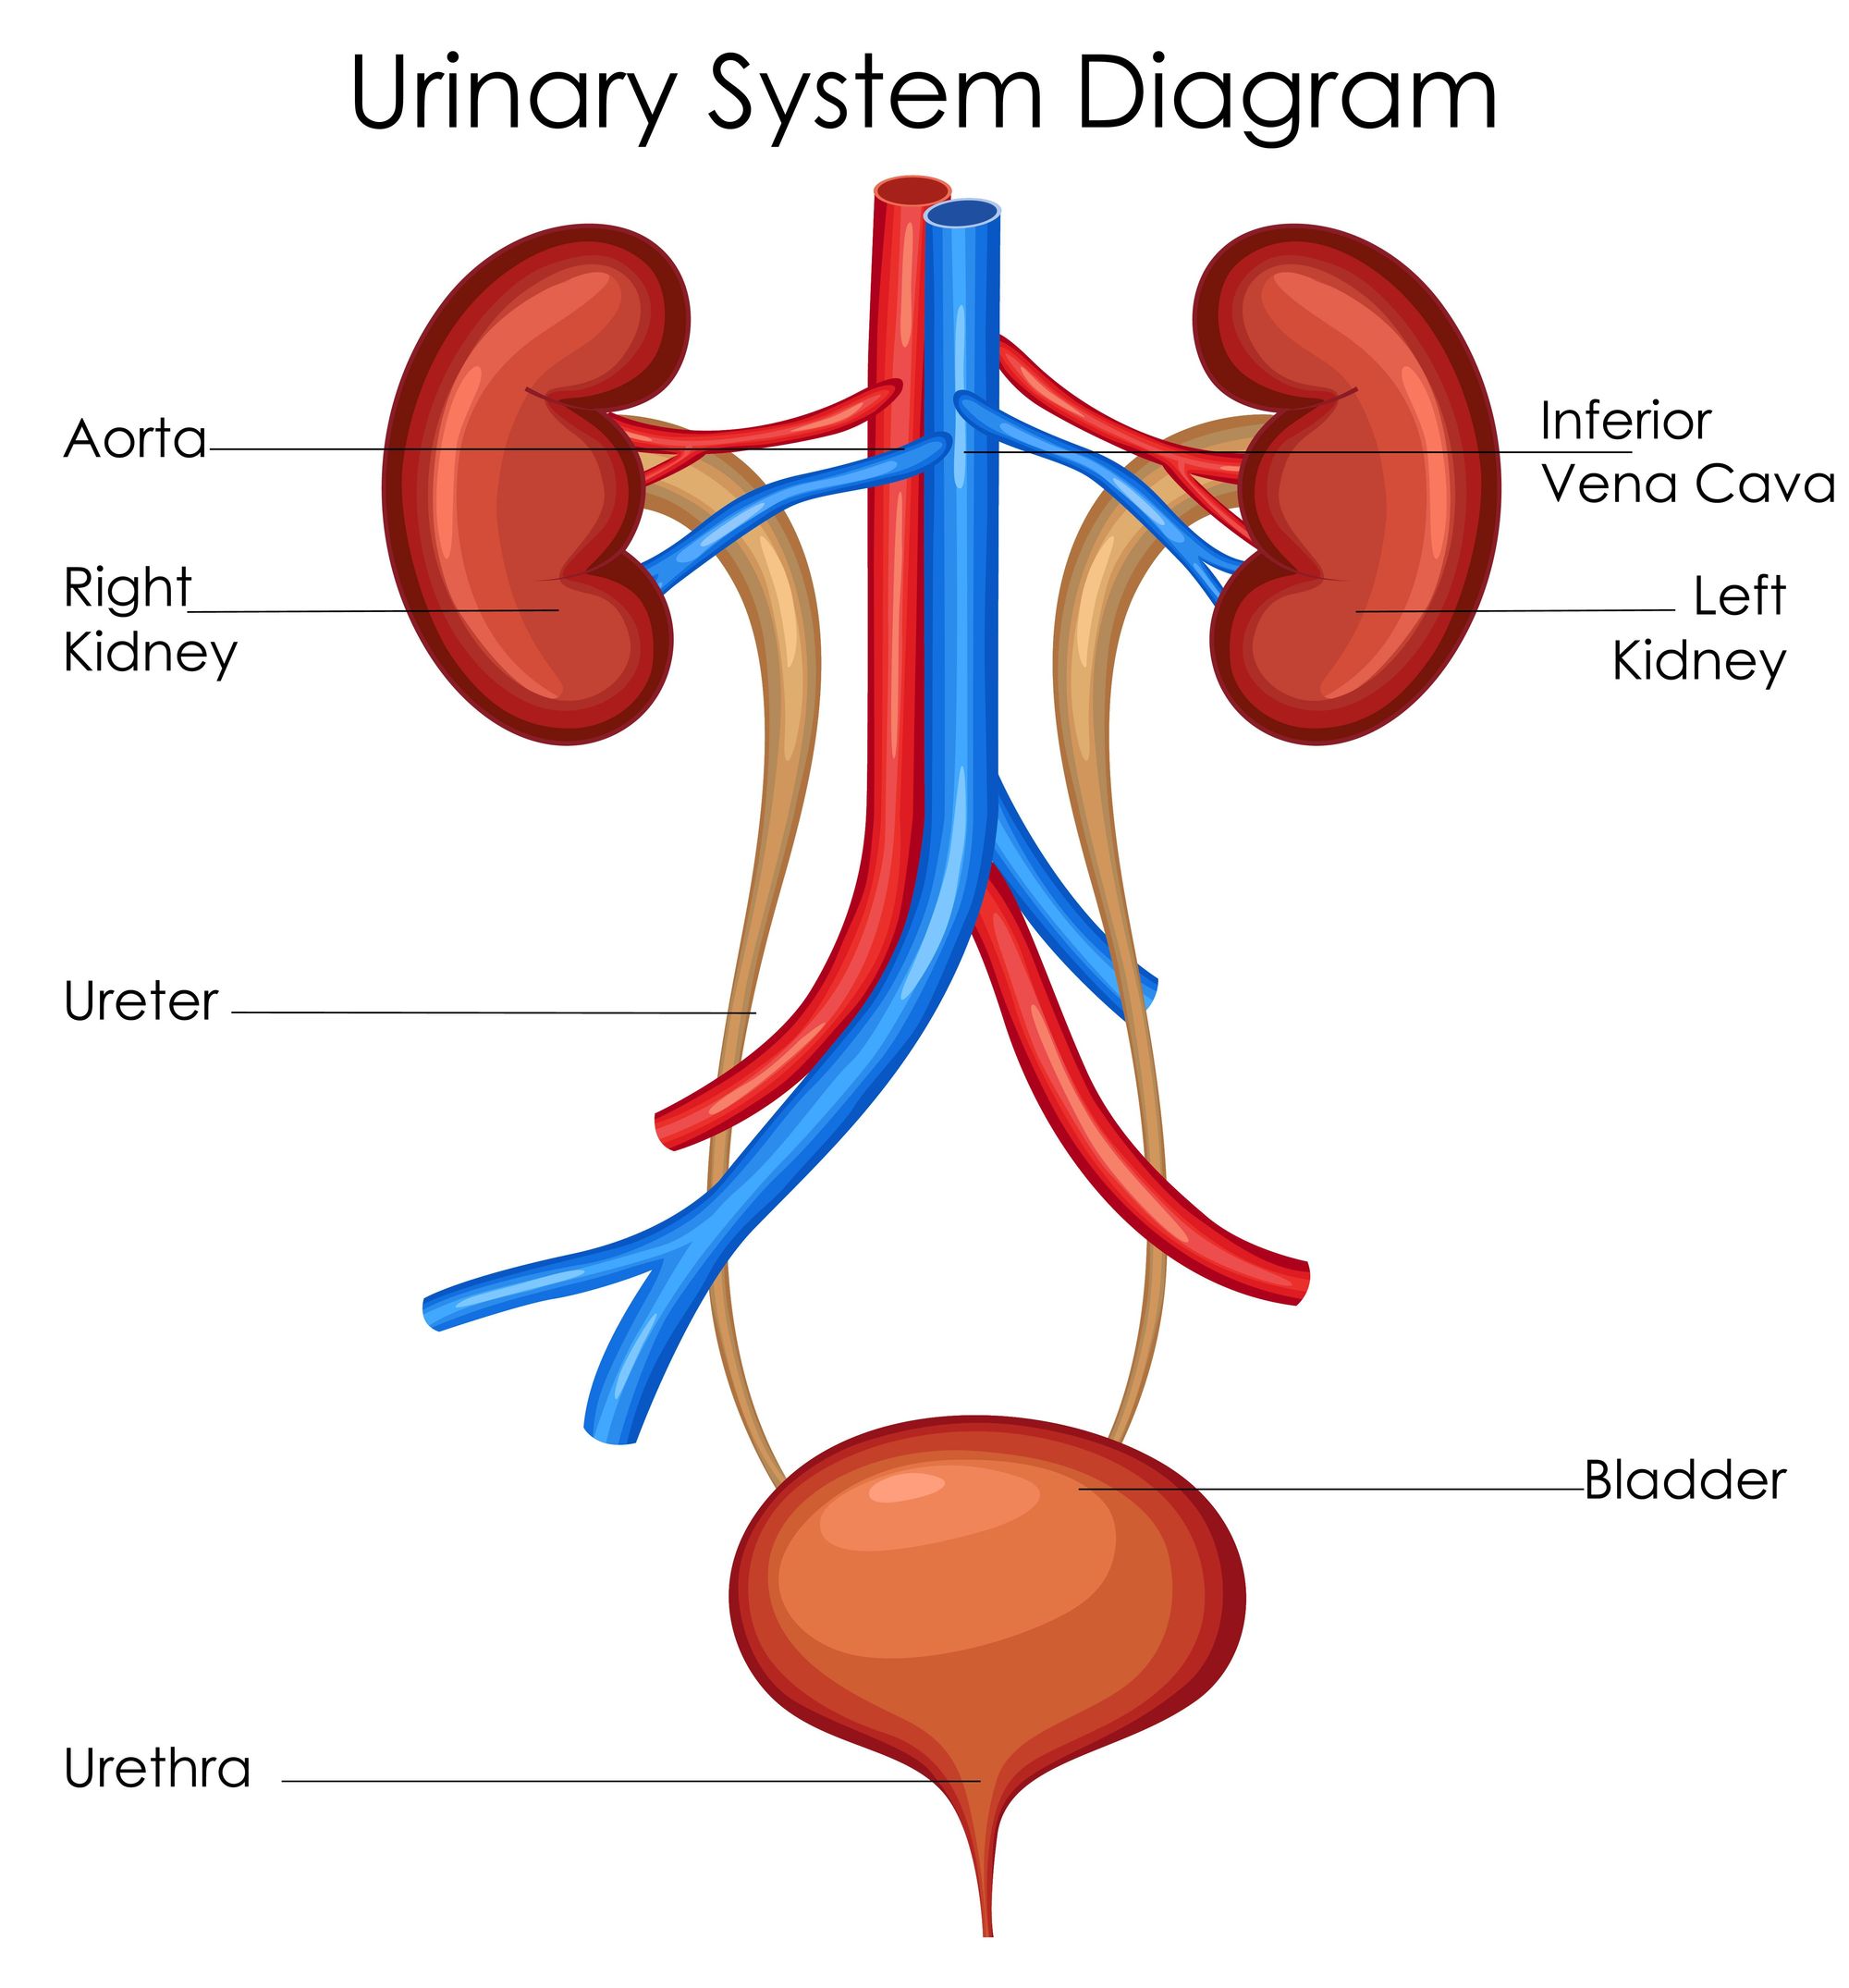 A diagram of the urinary system, showing the different types of urinary incontinence